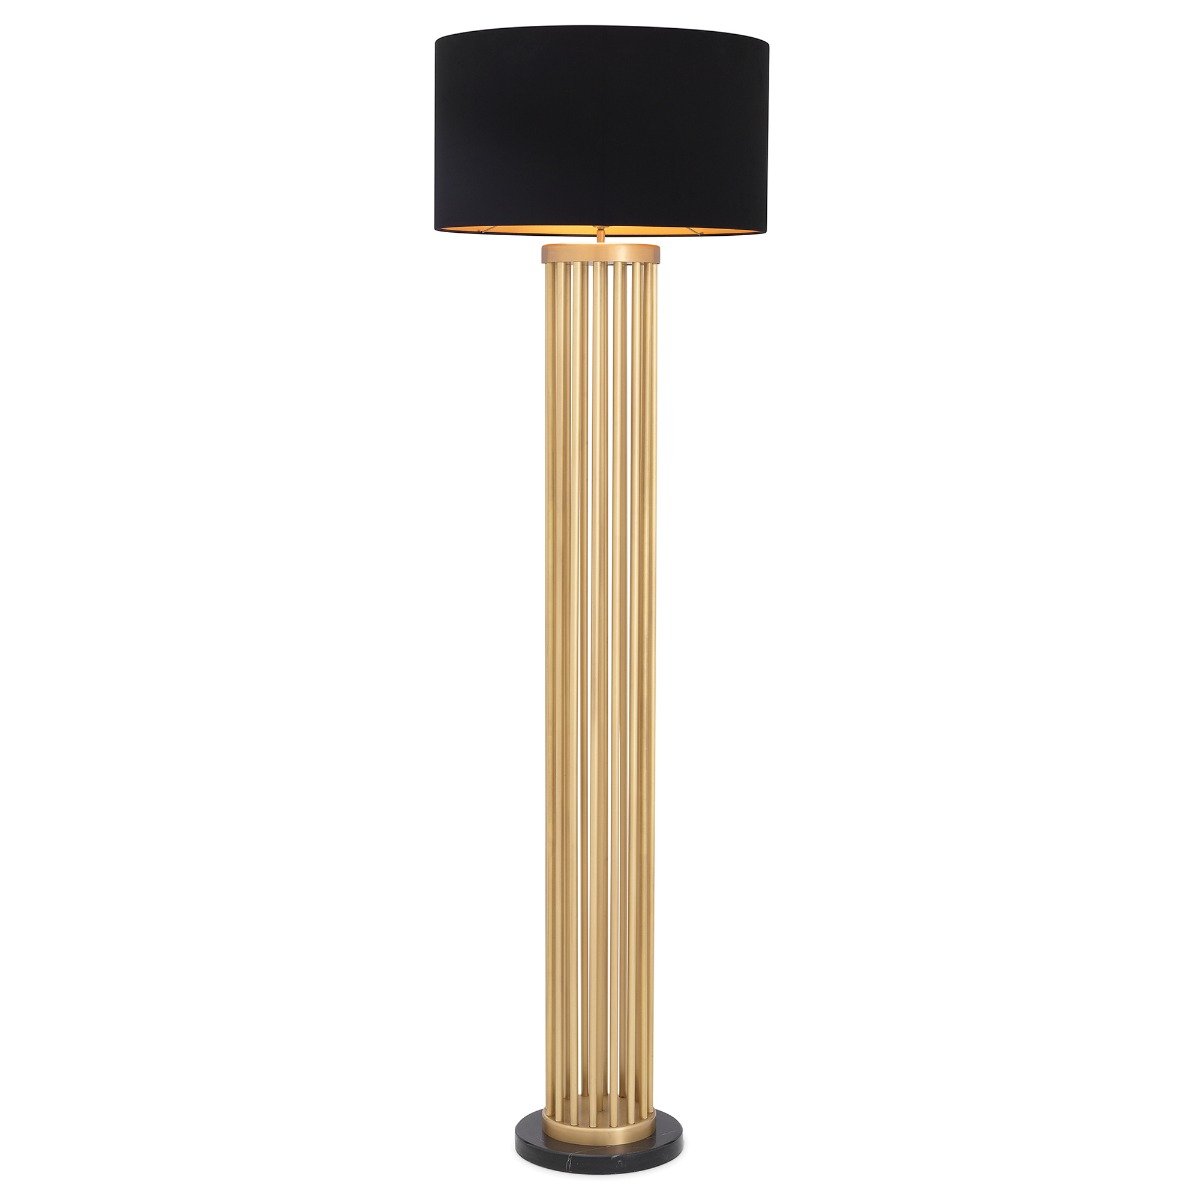 Eichholtz Condo Floor Lamp Including Shade, Gold Metal | Barker & Stonehouse